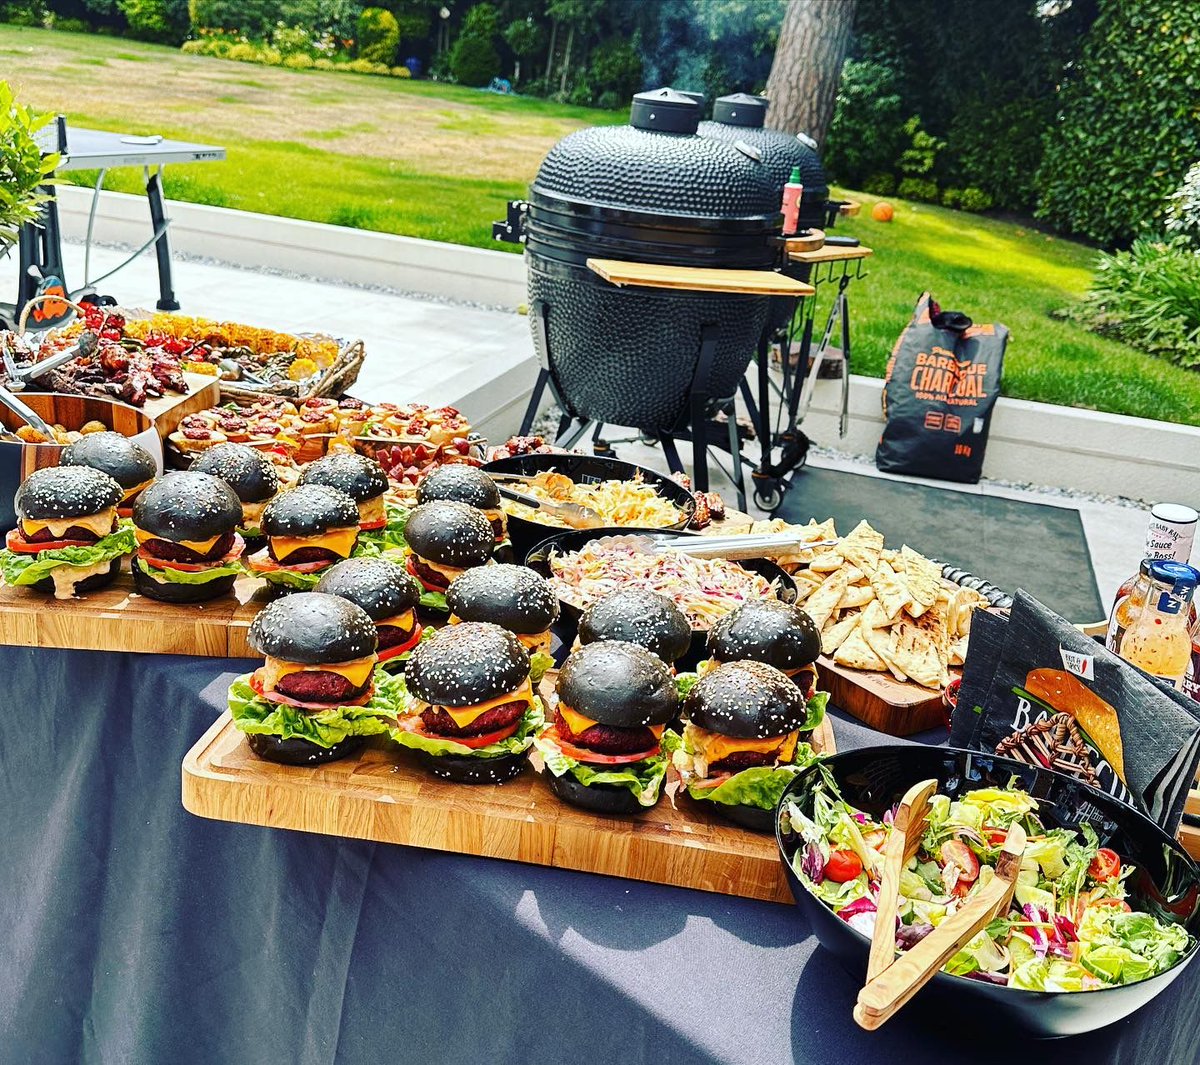 BBQ Catering for a Family.
Would you come to a Party like this?

#bbqparty #bbq